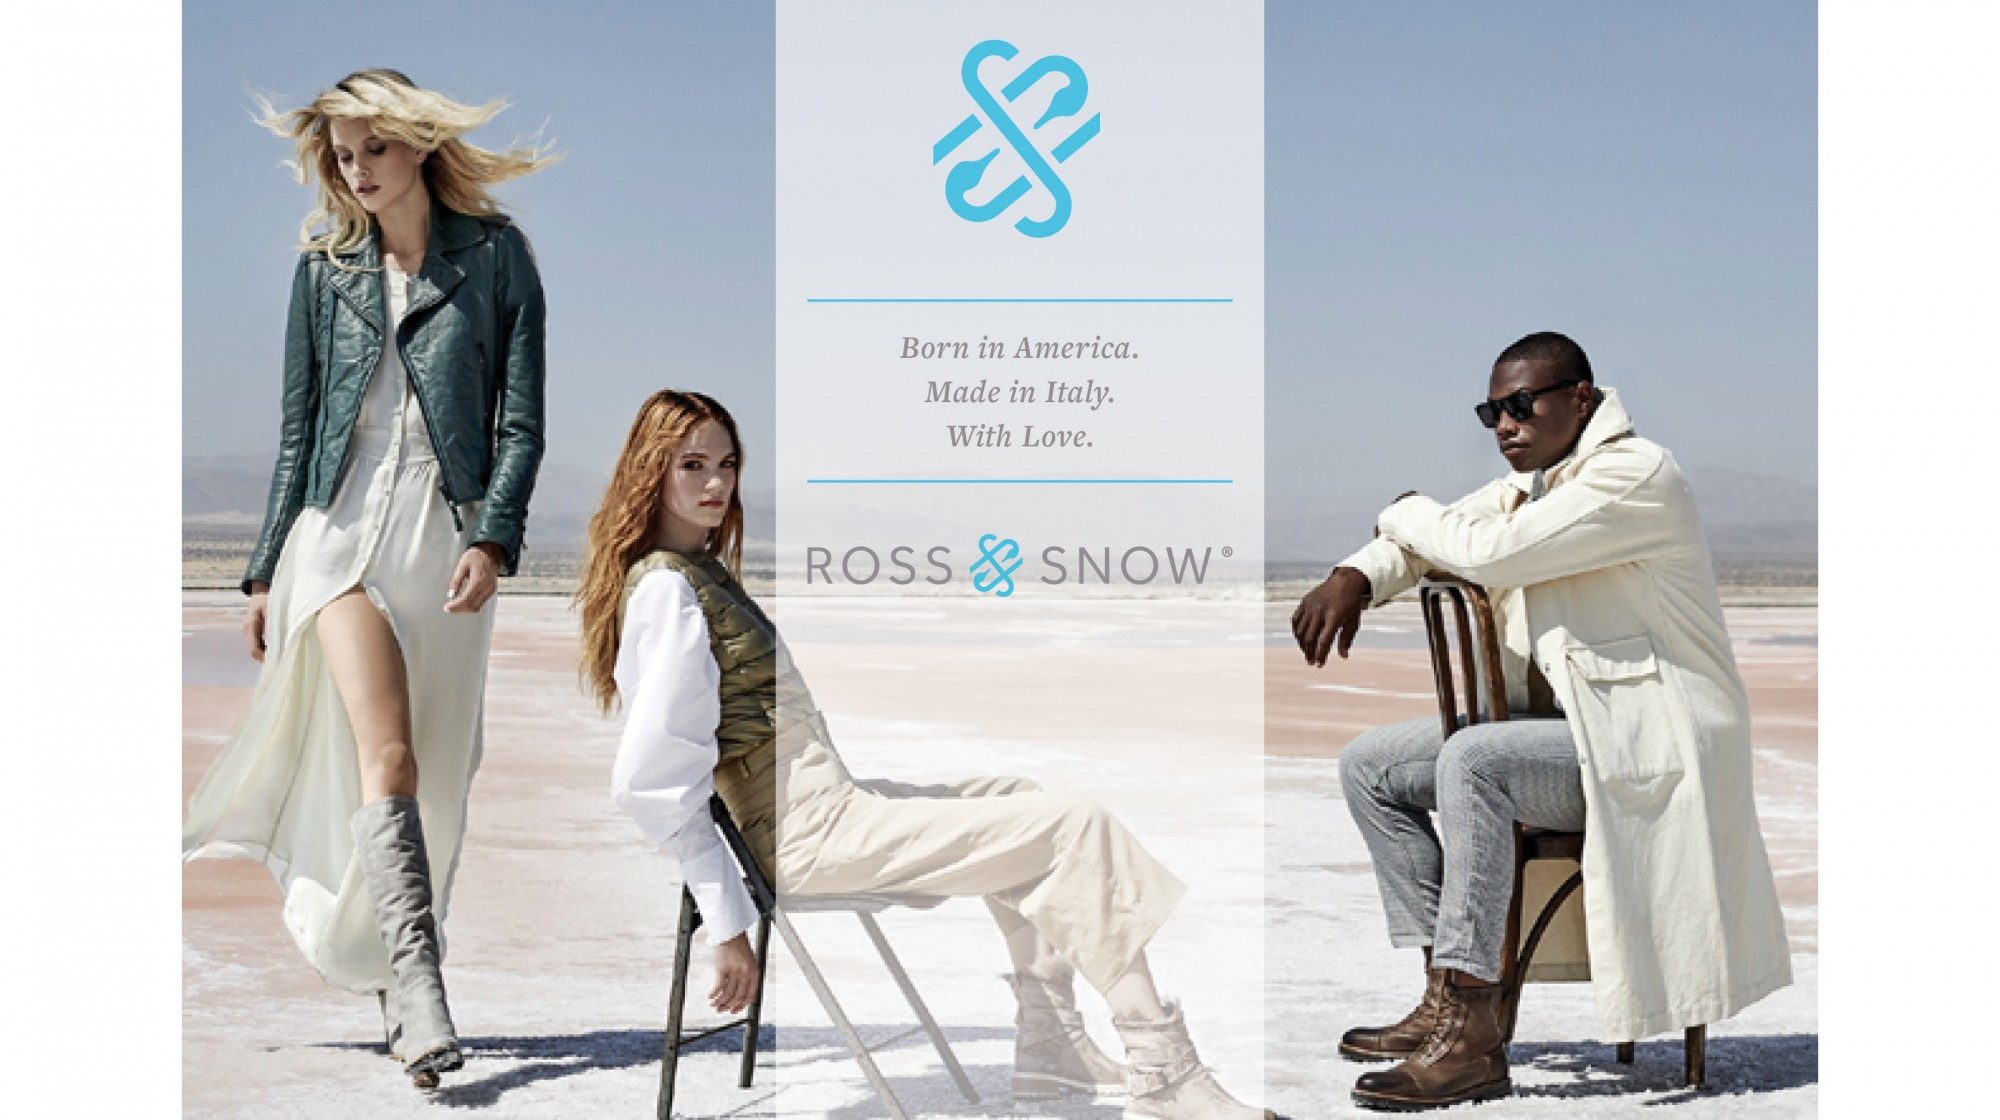 Ross & Snow - Shop Handcrafted Italian-Made Boots.Earn 10% Cashback! Free shipping and easy returns.